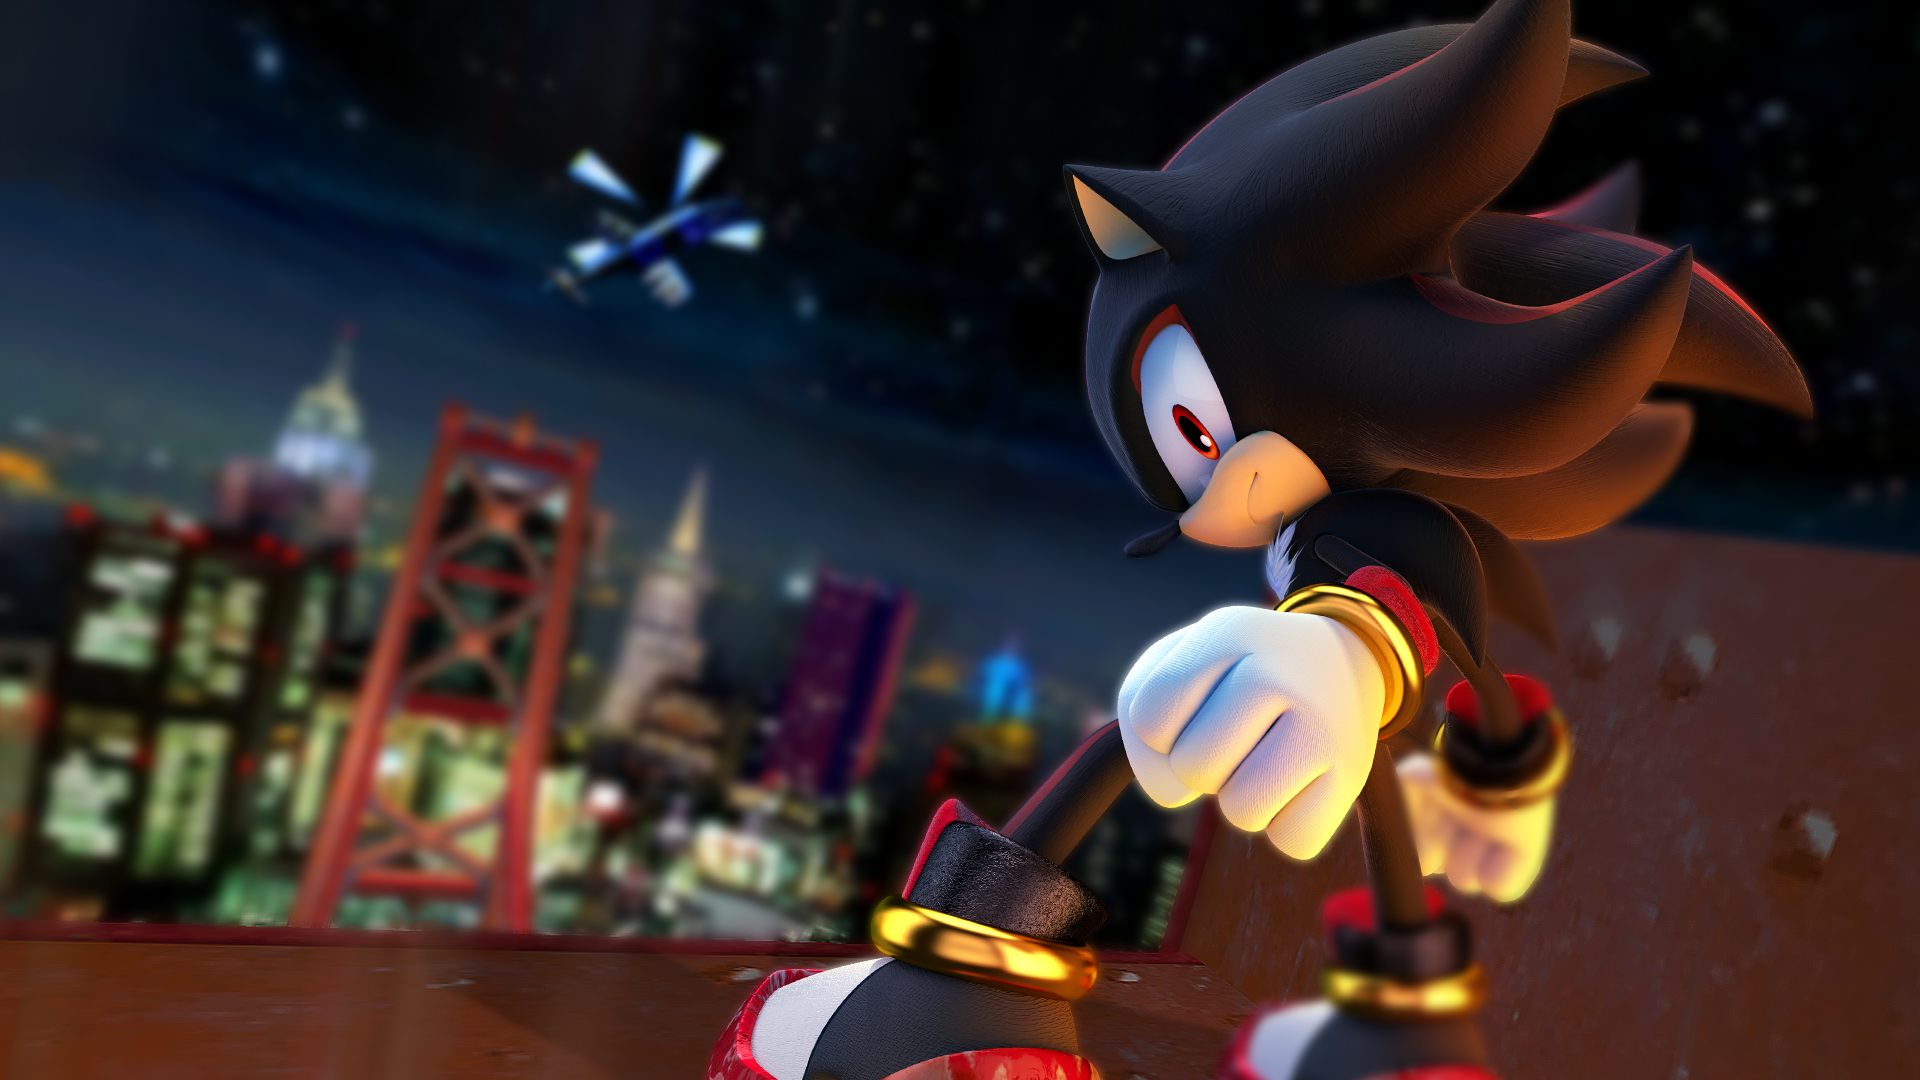  Shadow The Hedgehog HD Wallpapers Backgrounds